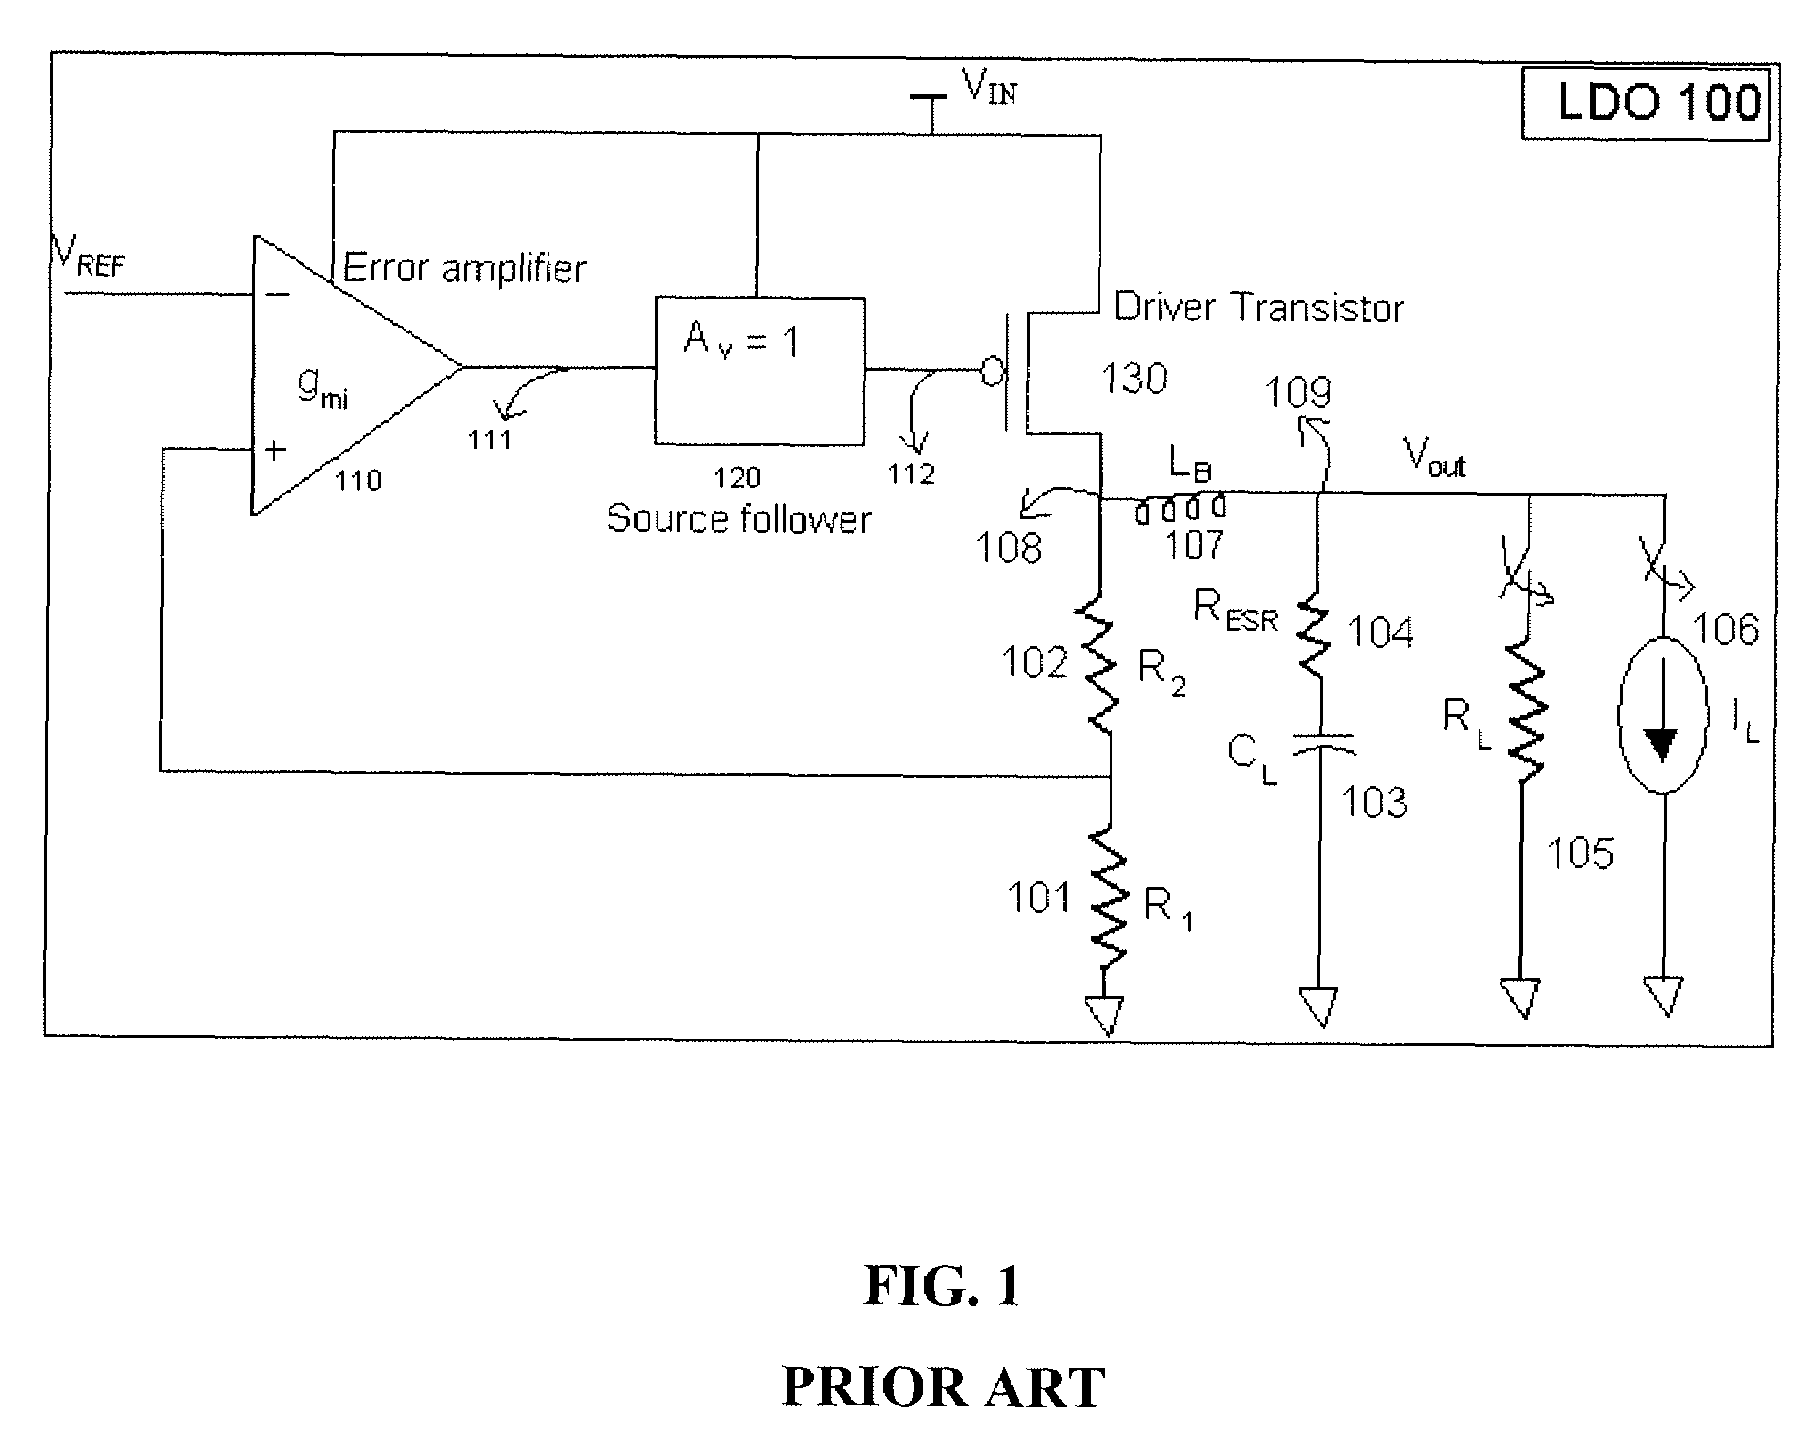 Low dropout regulator with stability compensation